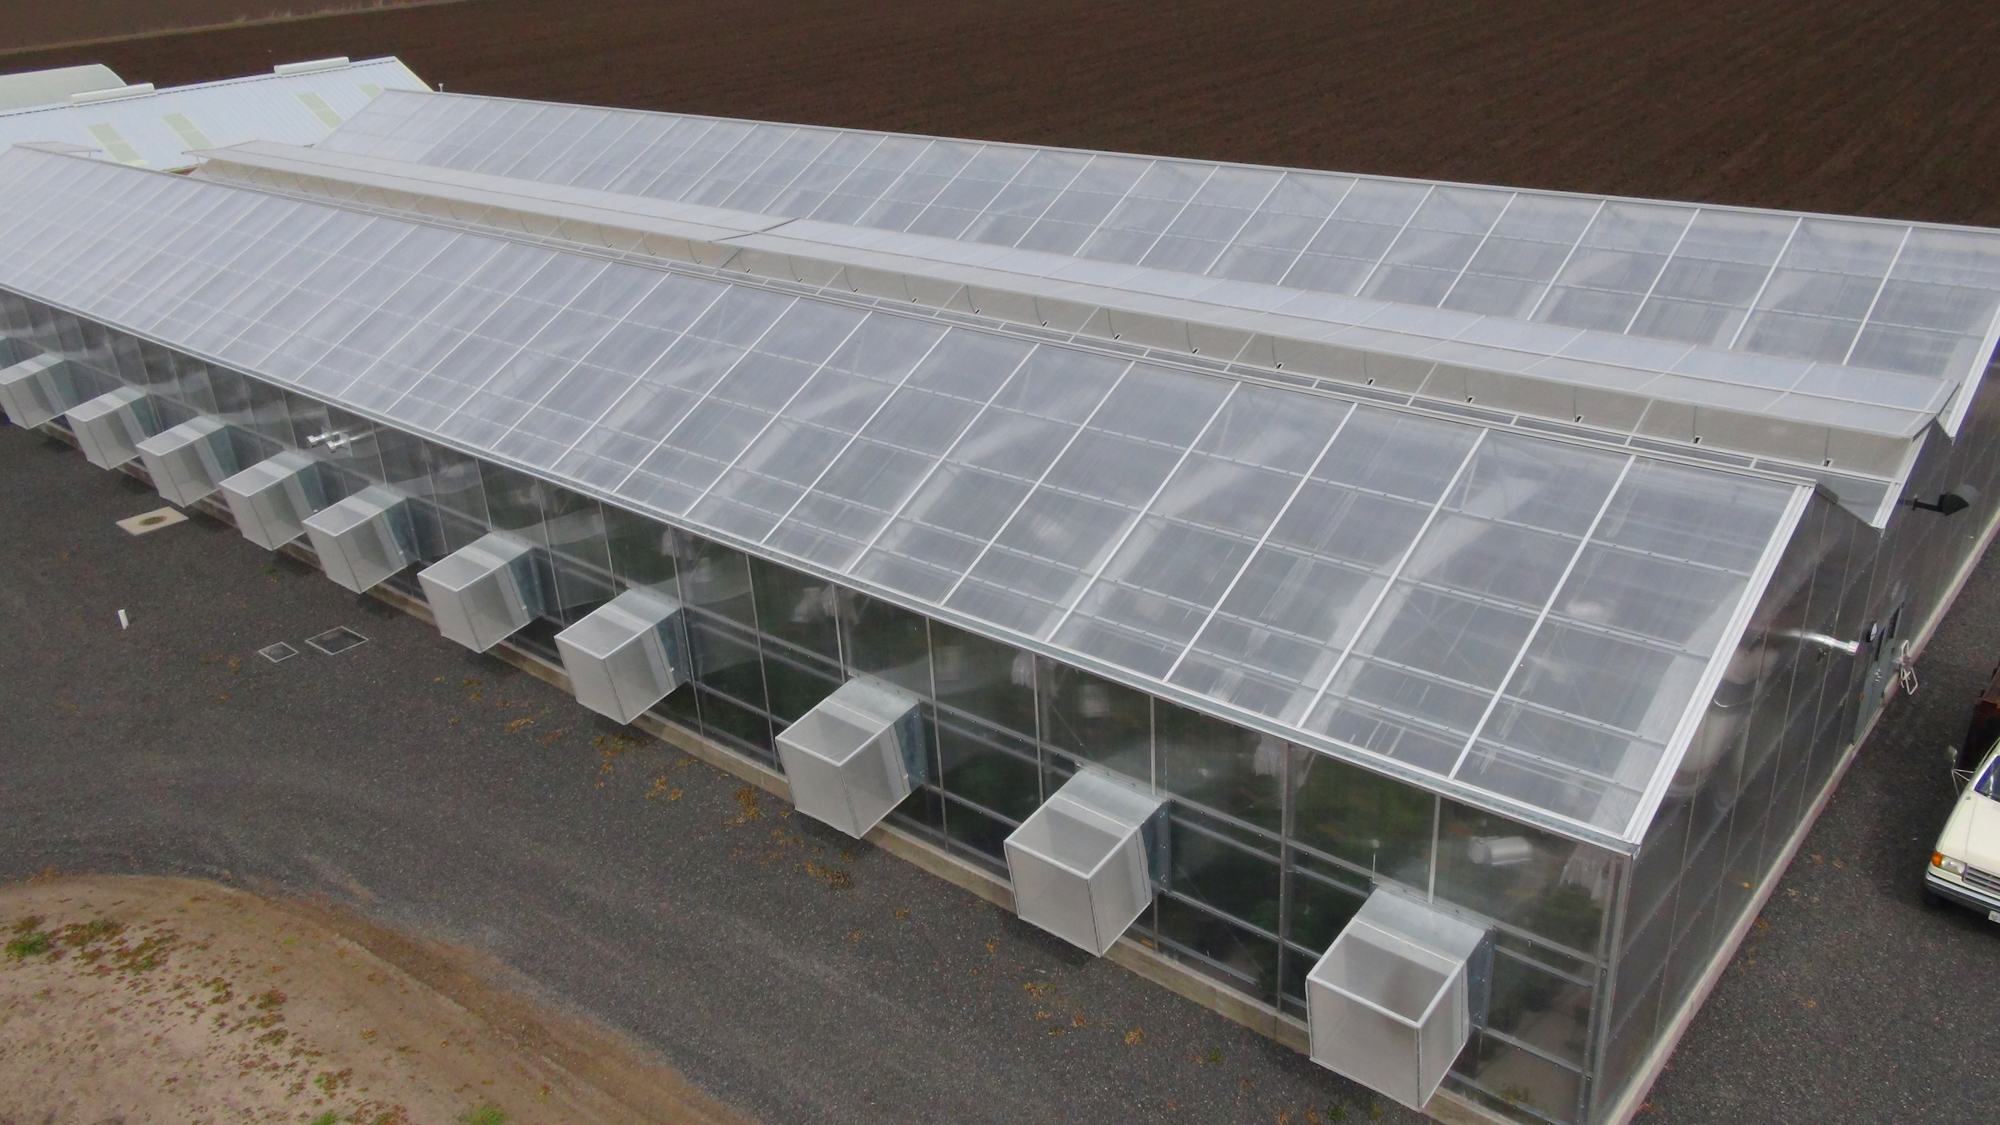 Heinz Tomate Research Facility in a Conley's Greenhouse Structure